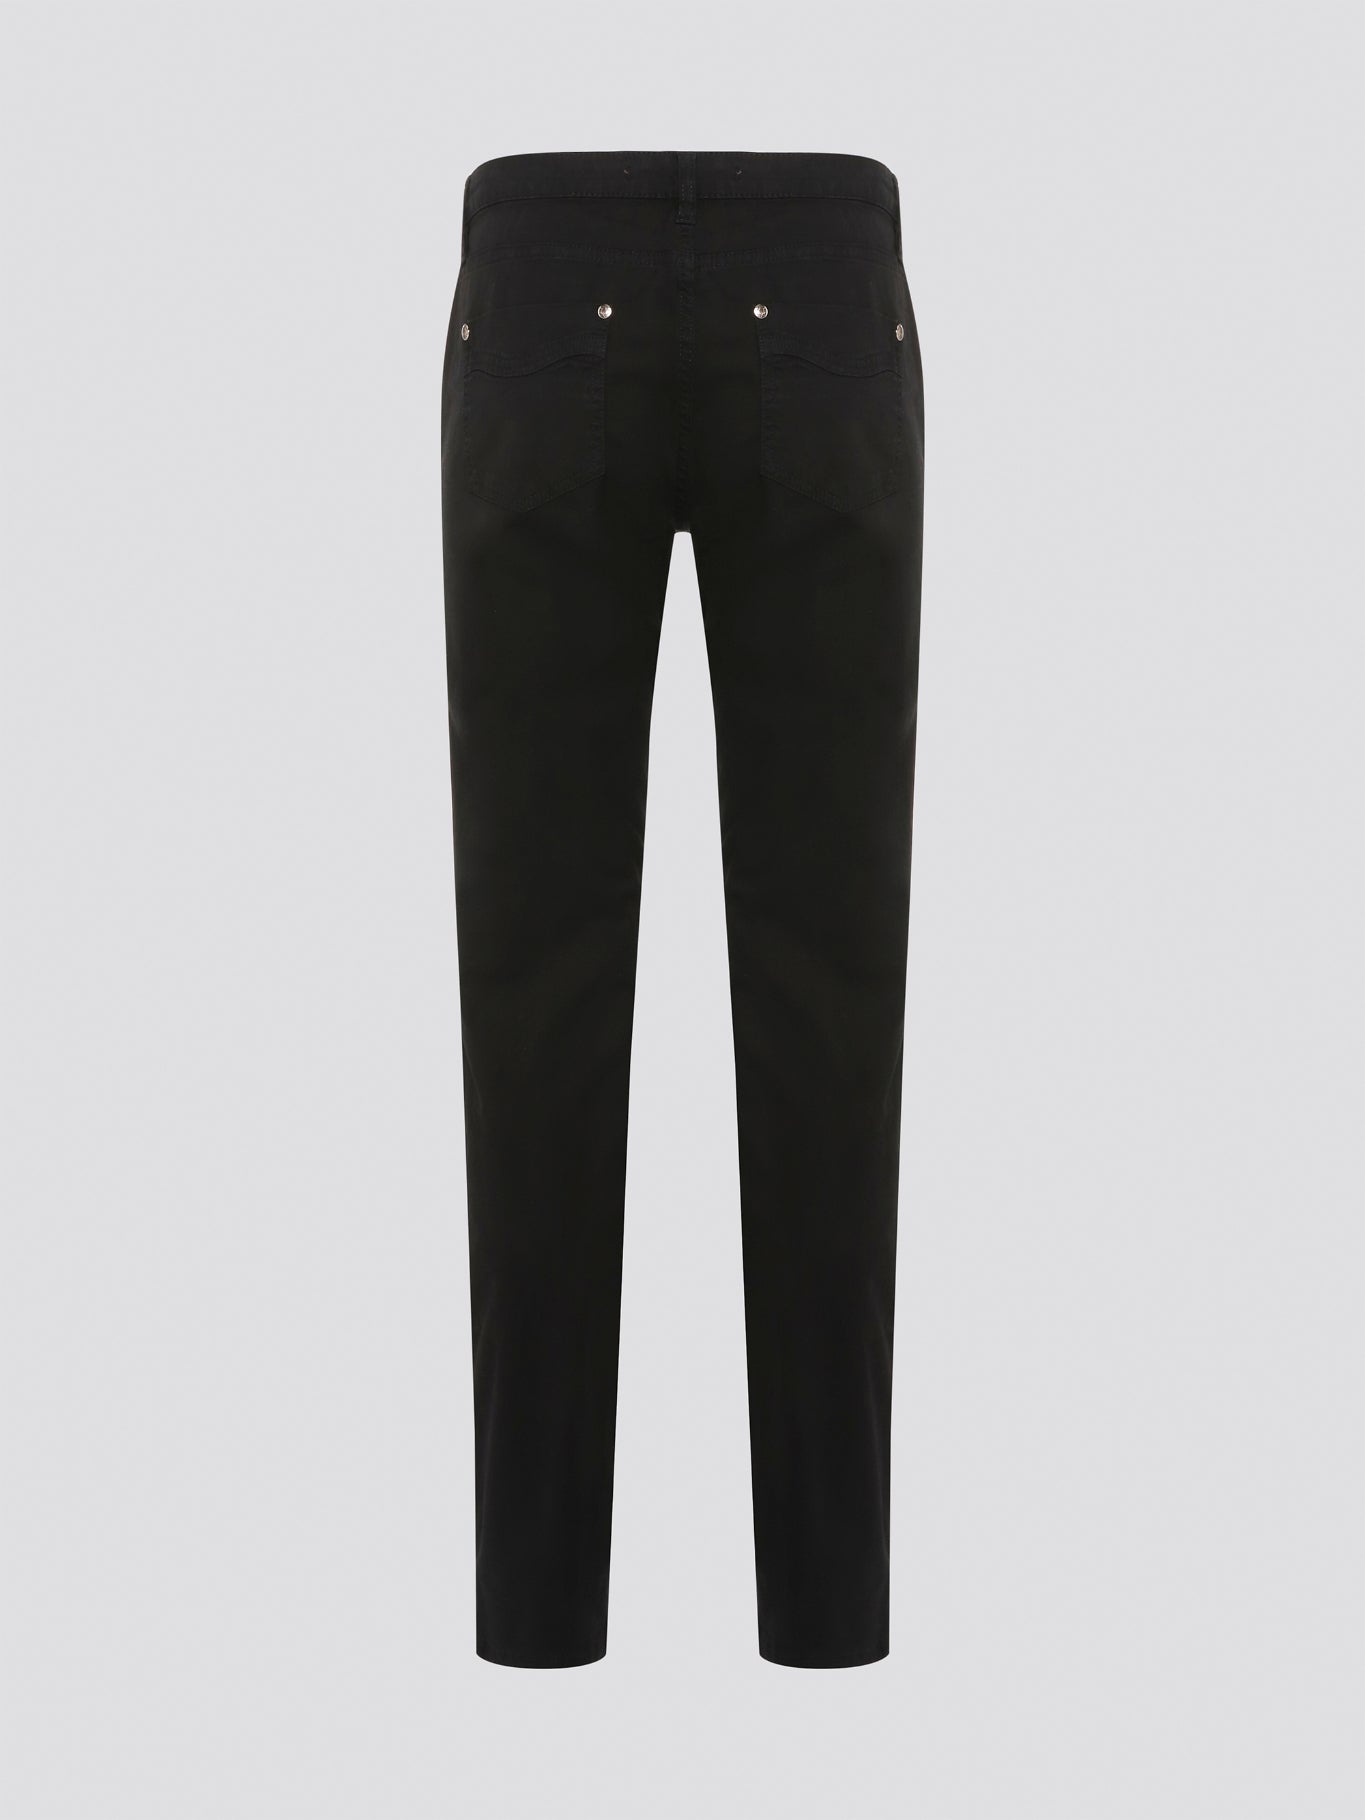 Step out in style with these sleek and versatile Black Skinny Fit Jeans from Roberto Cavalli. Made from premium quality denim, these jeans hug your curves in all the right places while offering unbeatable comfort. Whether dressed up with heels or down with sneakers, these jeans are a must-have for any fashion-forward wardrobe.